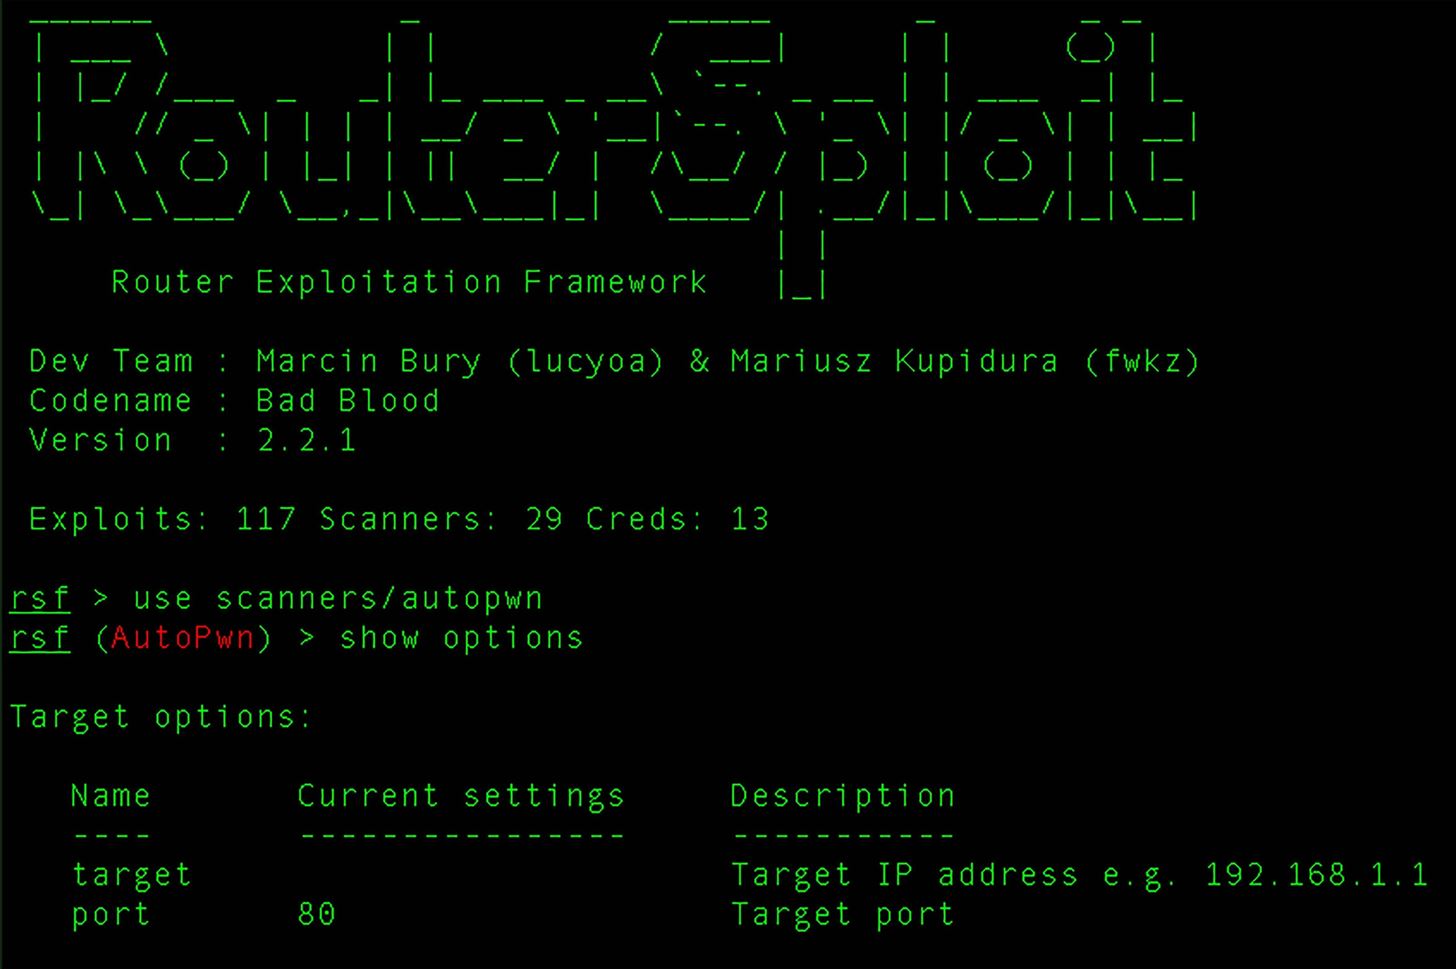 How to Seize Control of a Router with RouterSploit